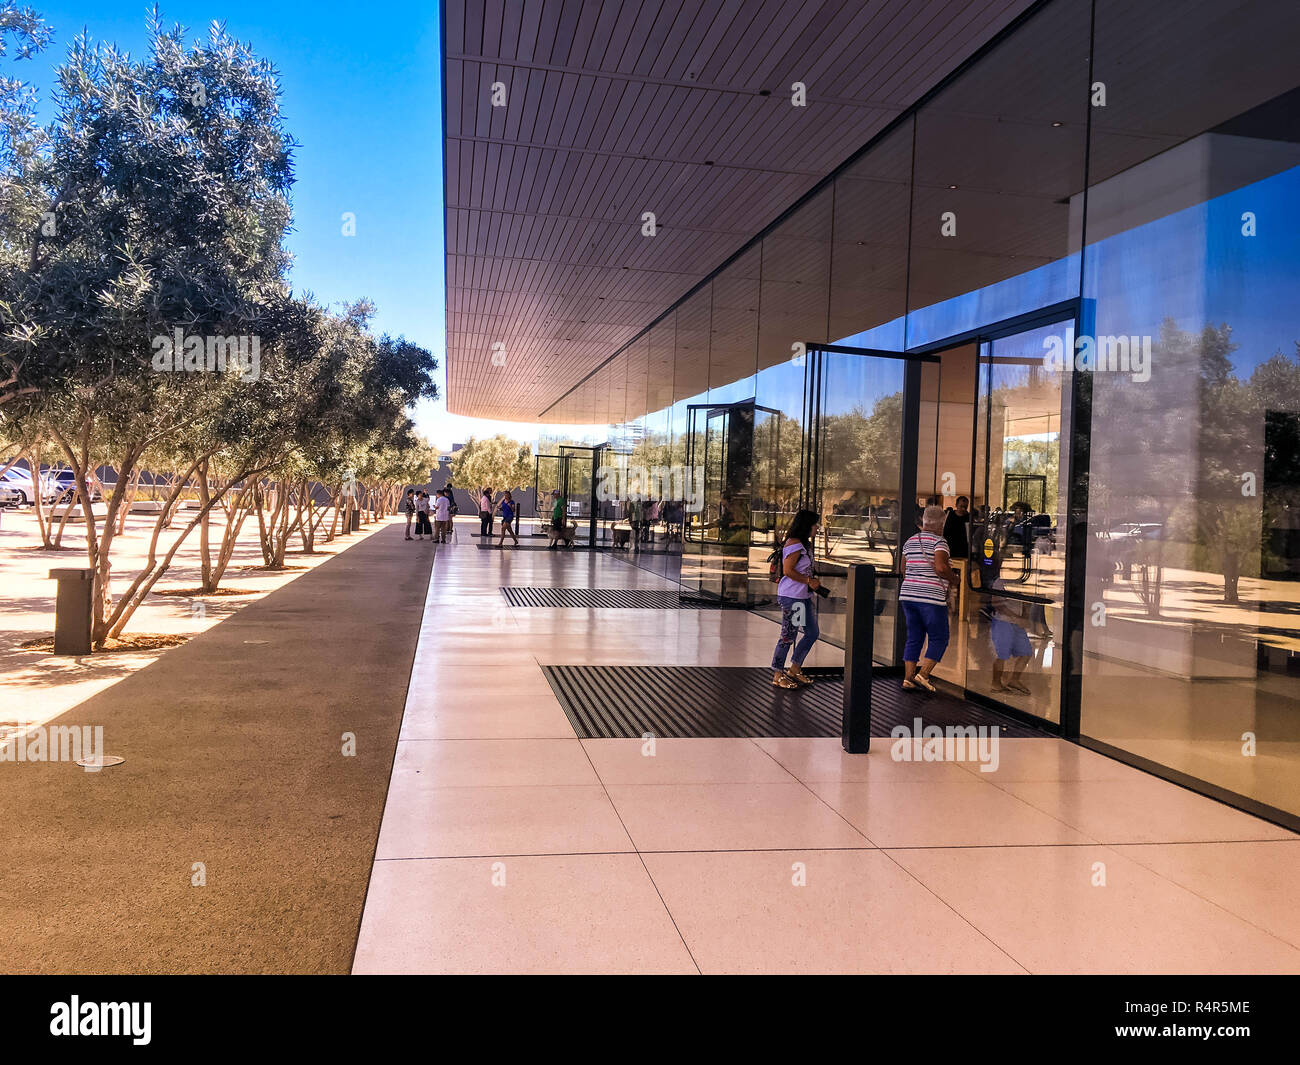 Apple Visitor Center, 1 Apple Park Way, San Jose, California, United States (USA) - August 5, 2018: Guest customers are interested of Apple products Stock Photo